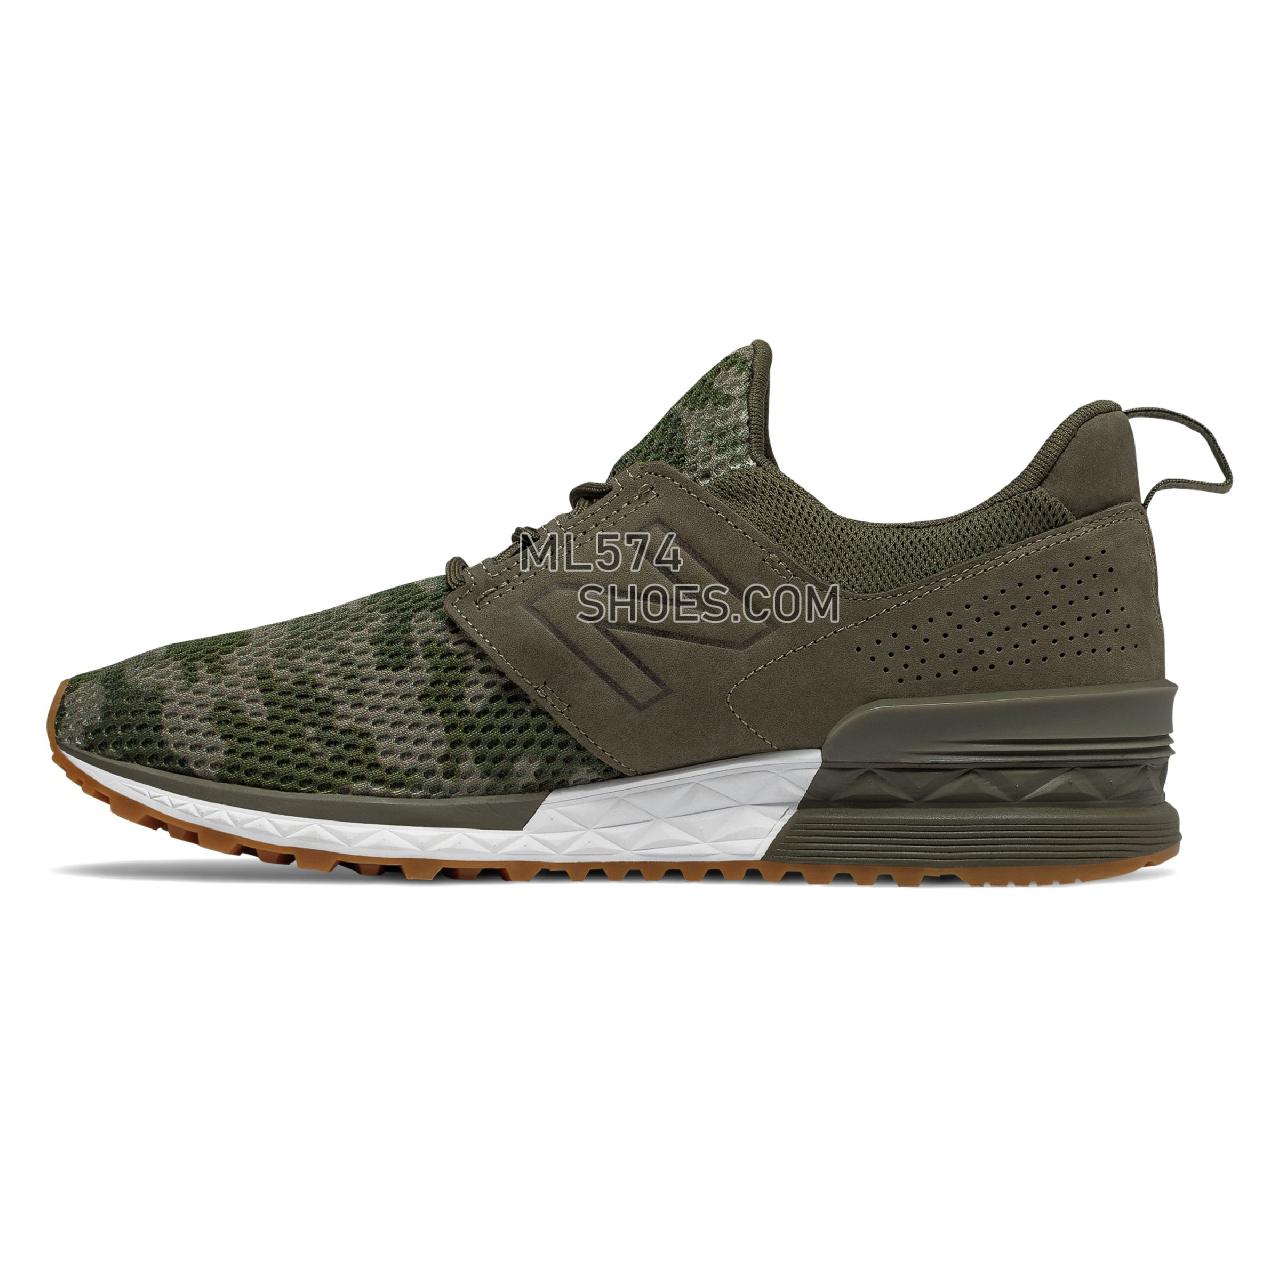 New Balance 574 Sport Decon - Men's 574 - Classic Military Foliage Green with Covert - MS574DCG